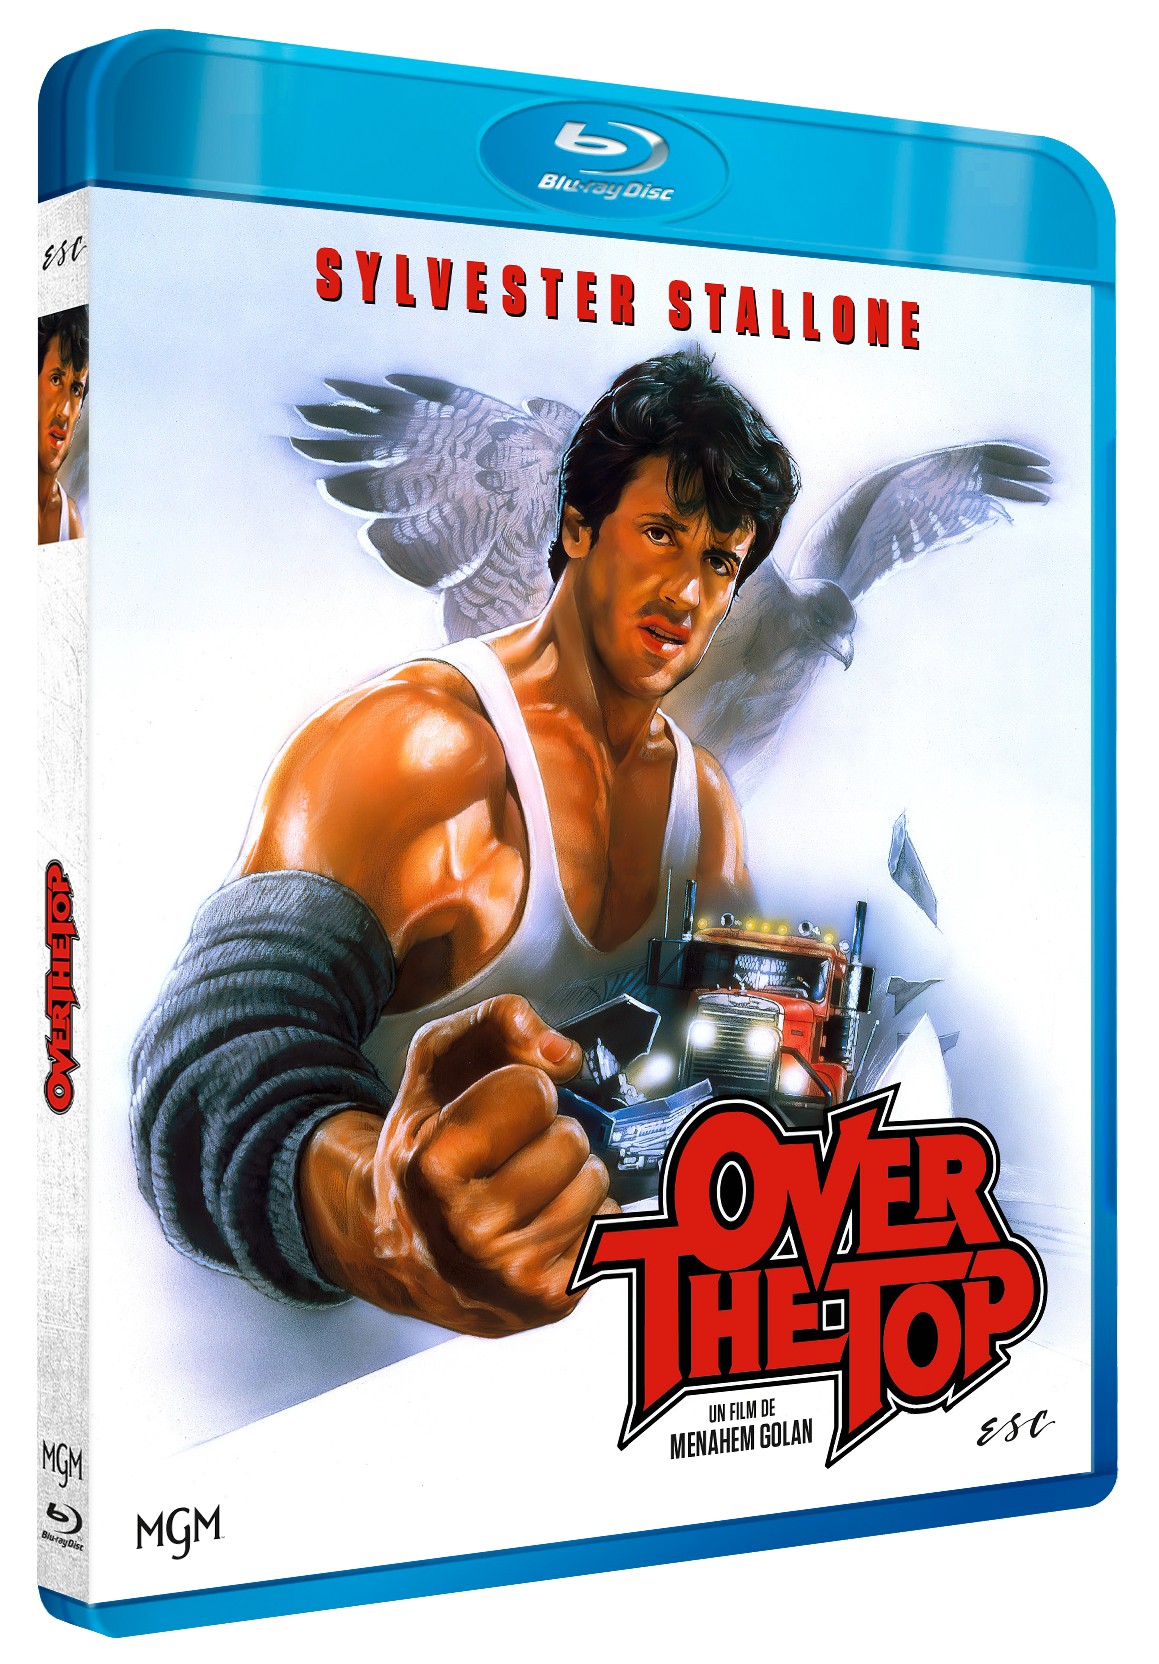 OVER THE TOP - DVD